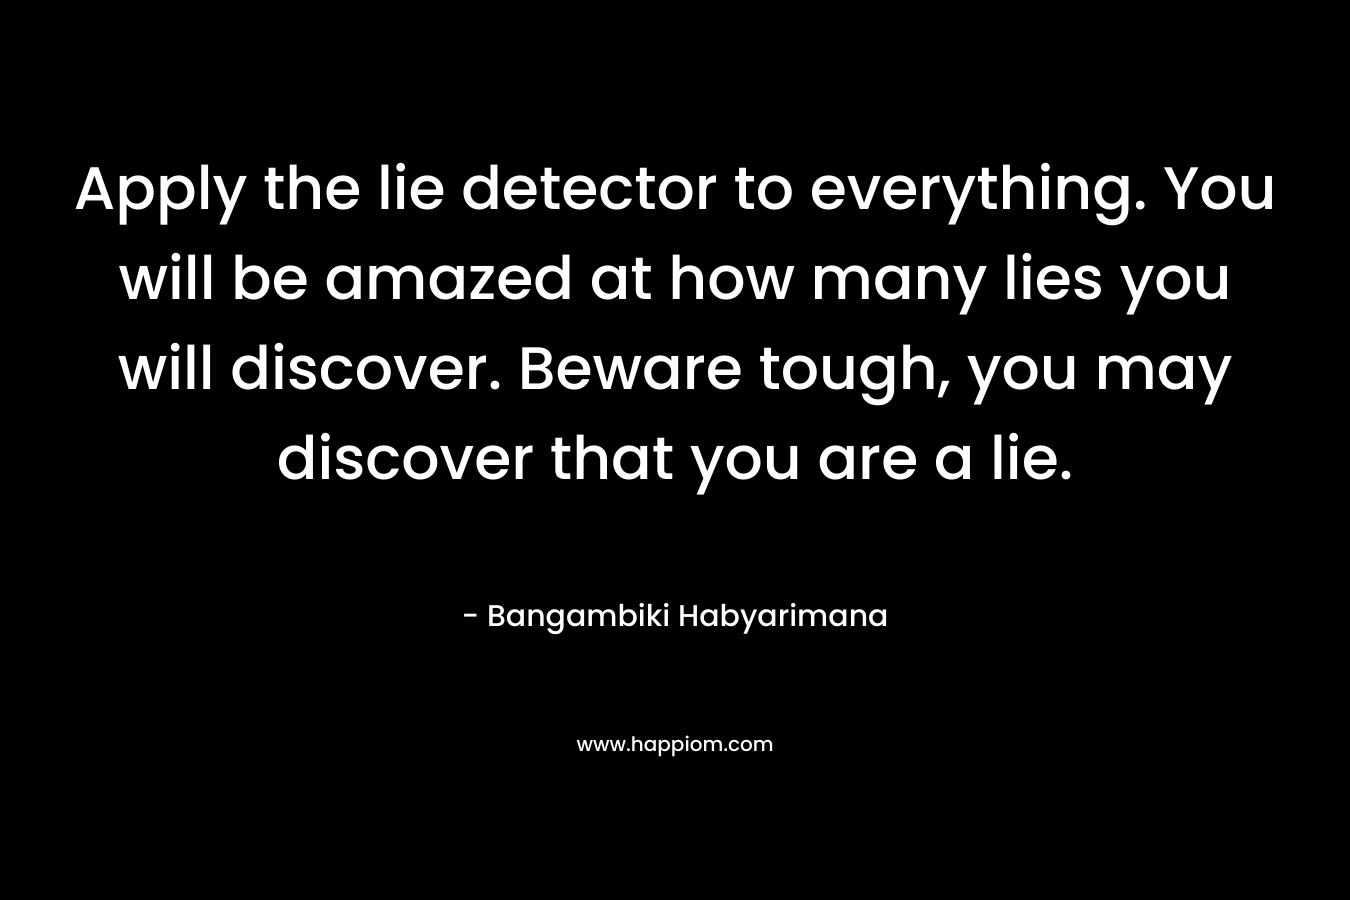 Apply the lie detector to everything. You will be amazed at how many lies you will discover. Beware tough, you may discover that you are a lie.